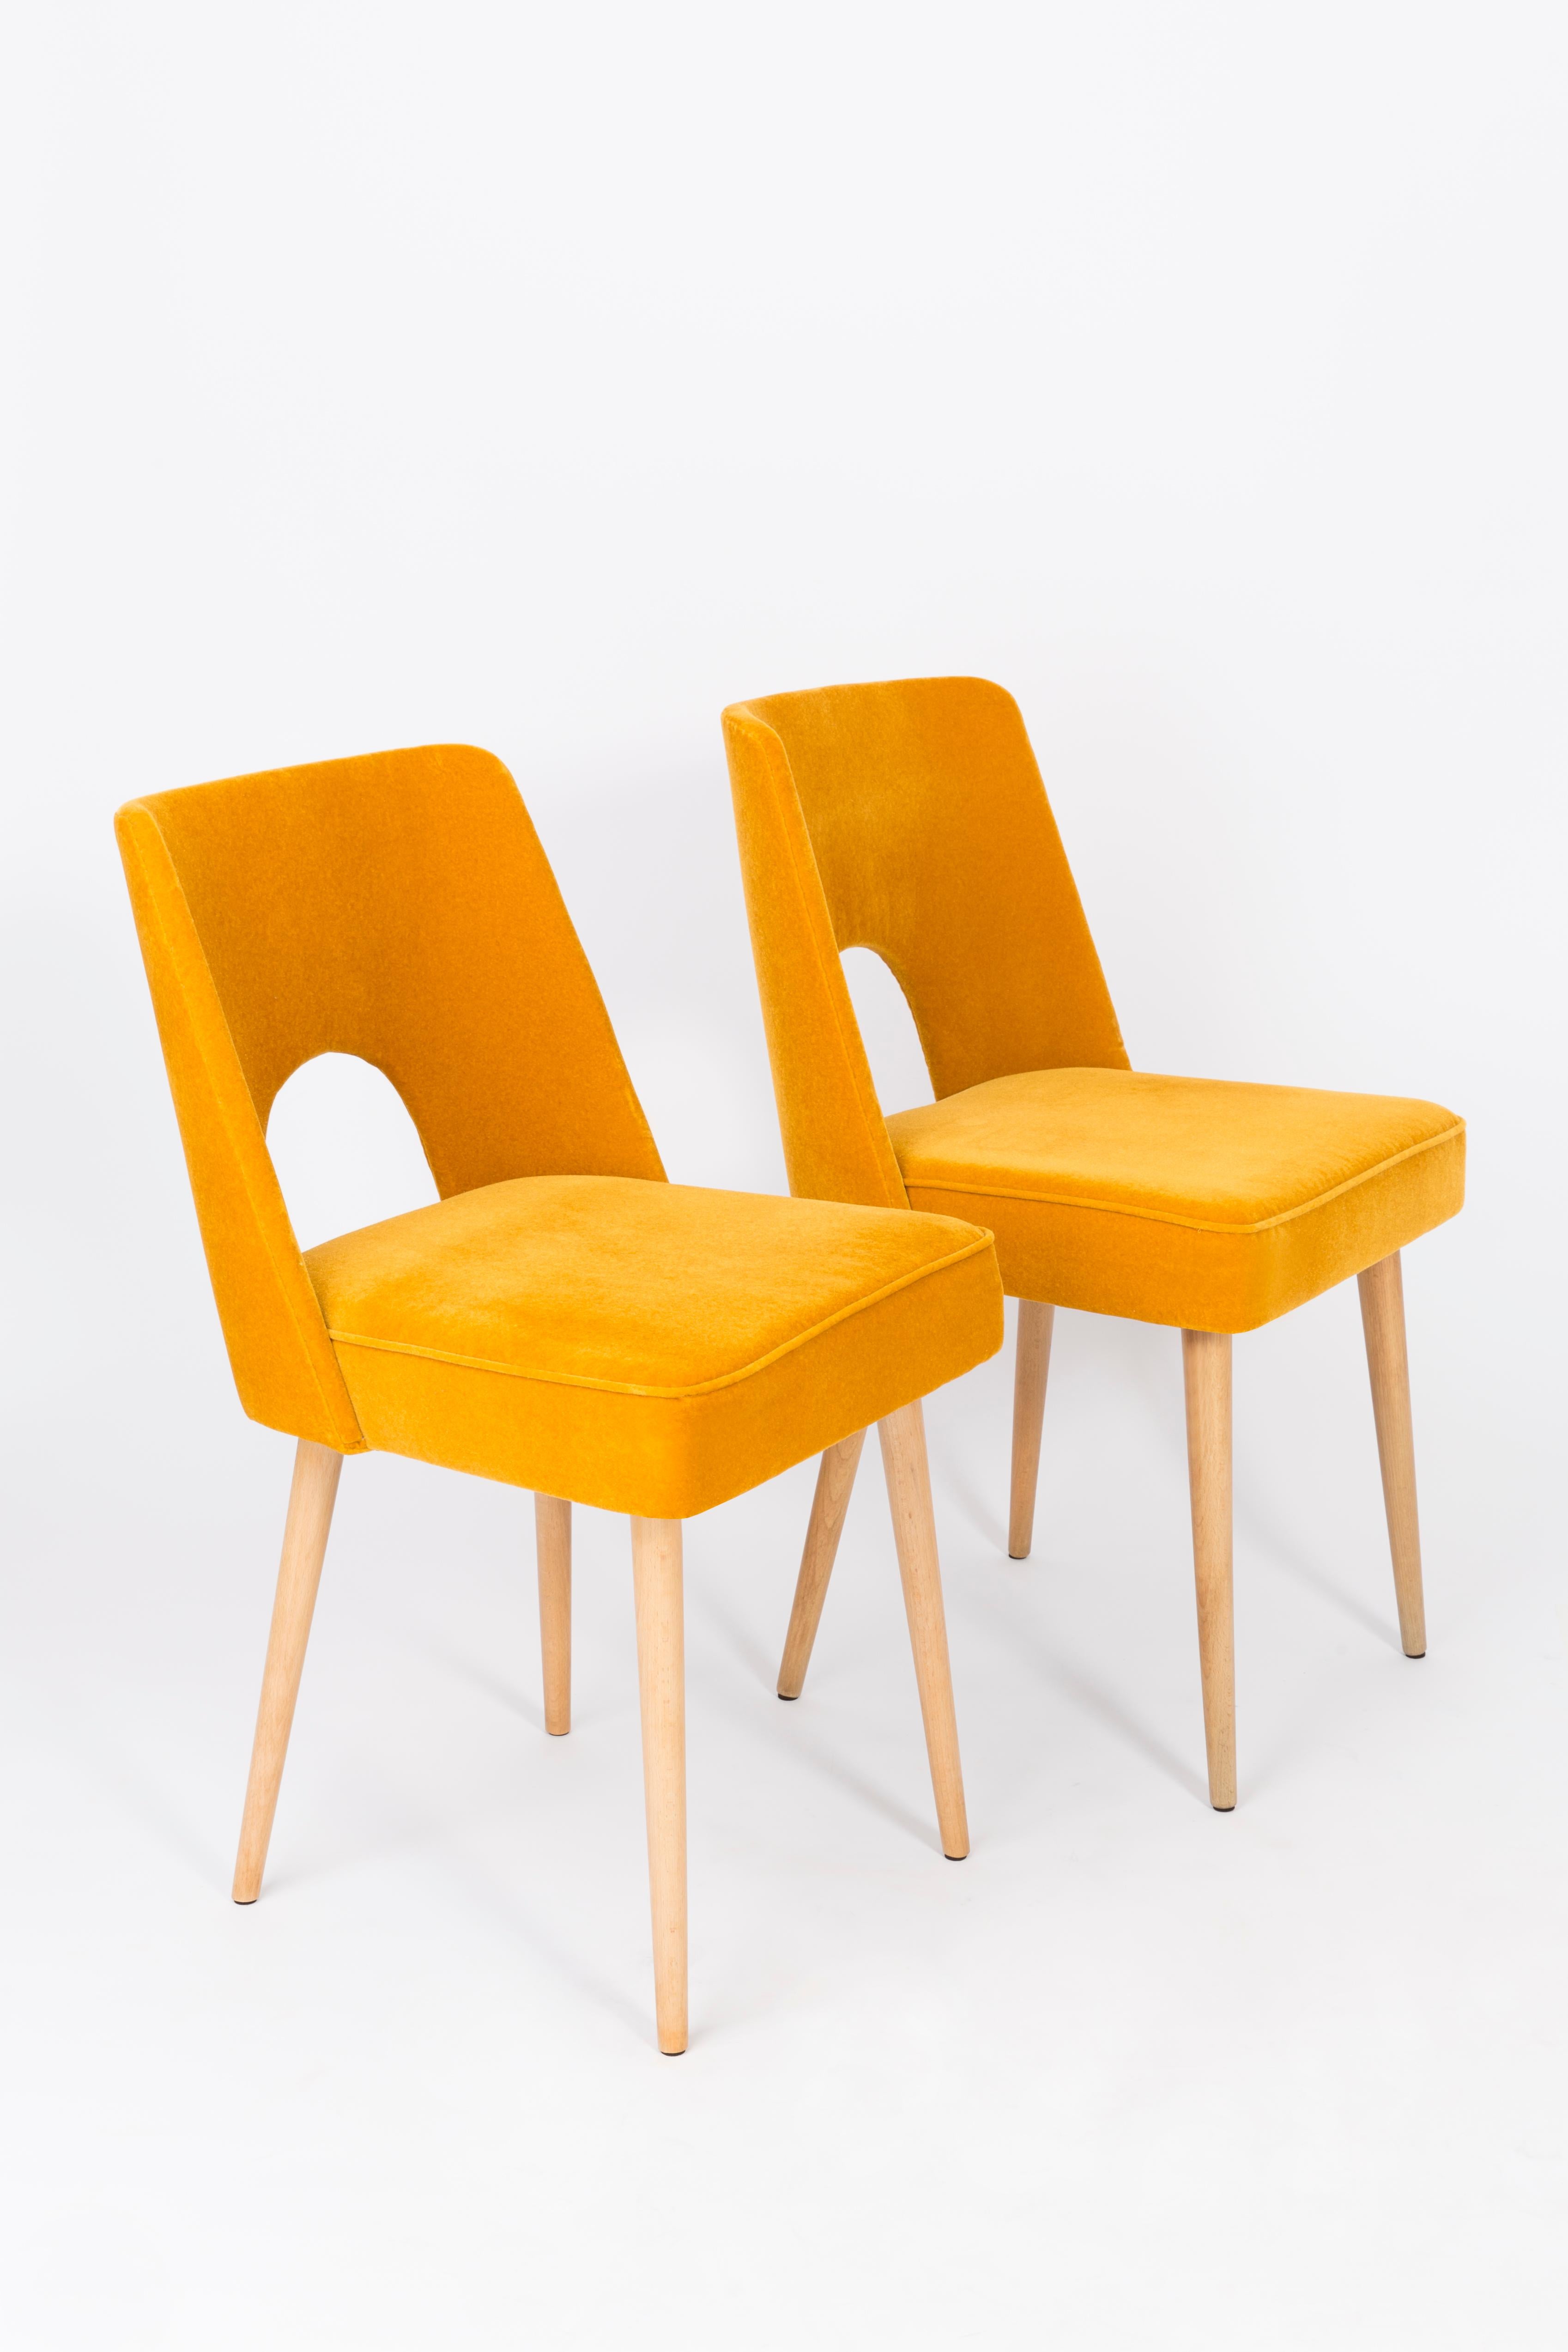 Two beautiful chairs type 1020 colloquially called 